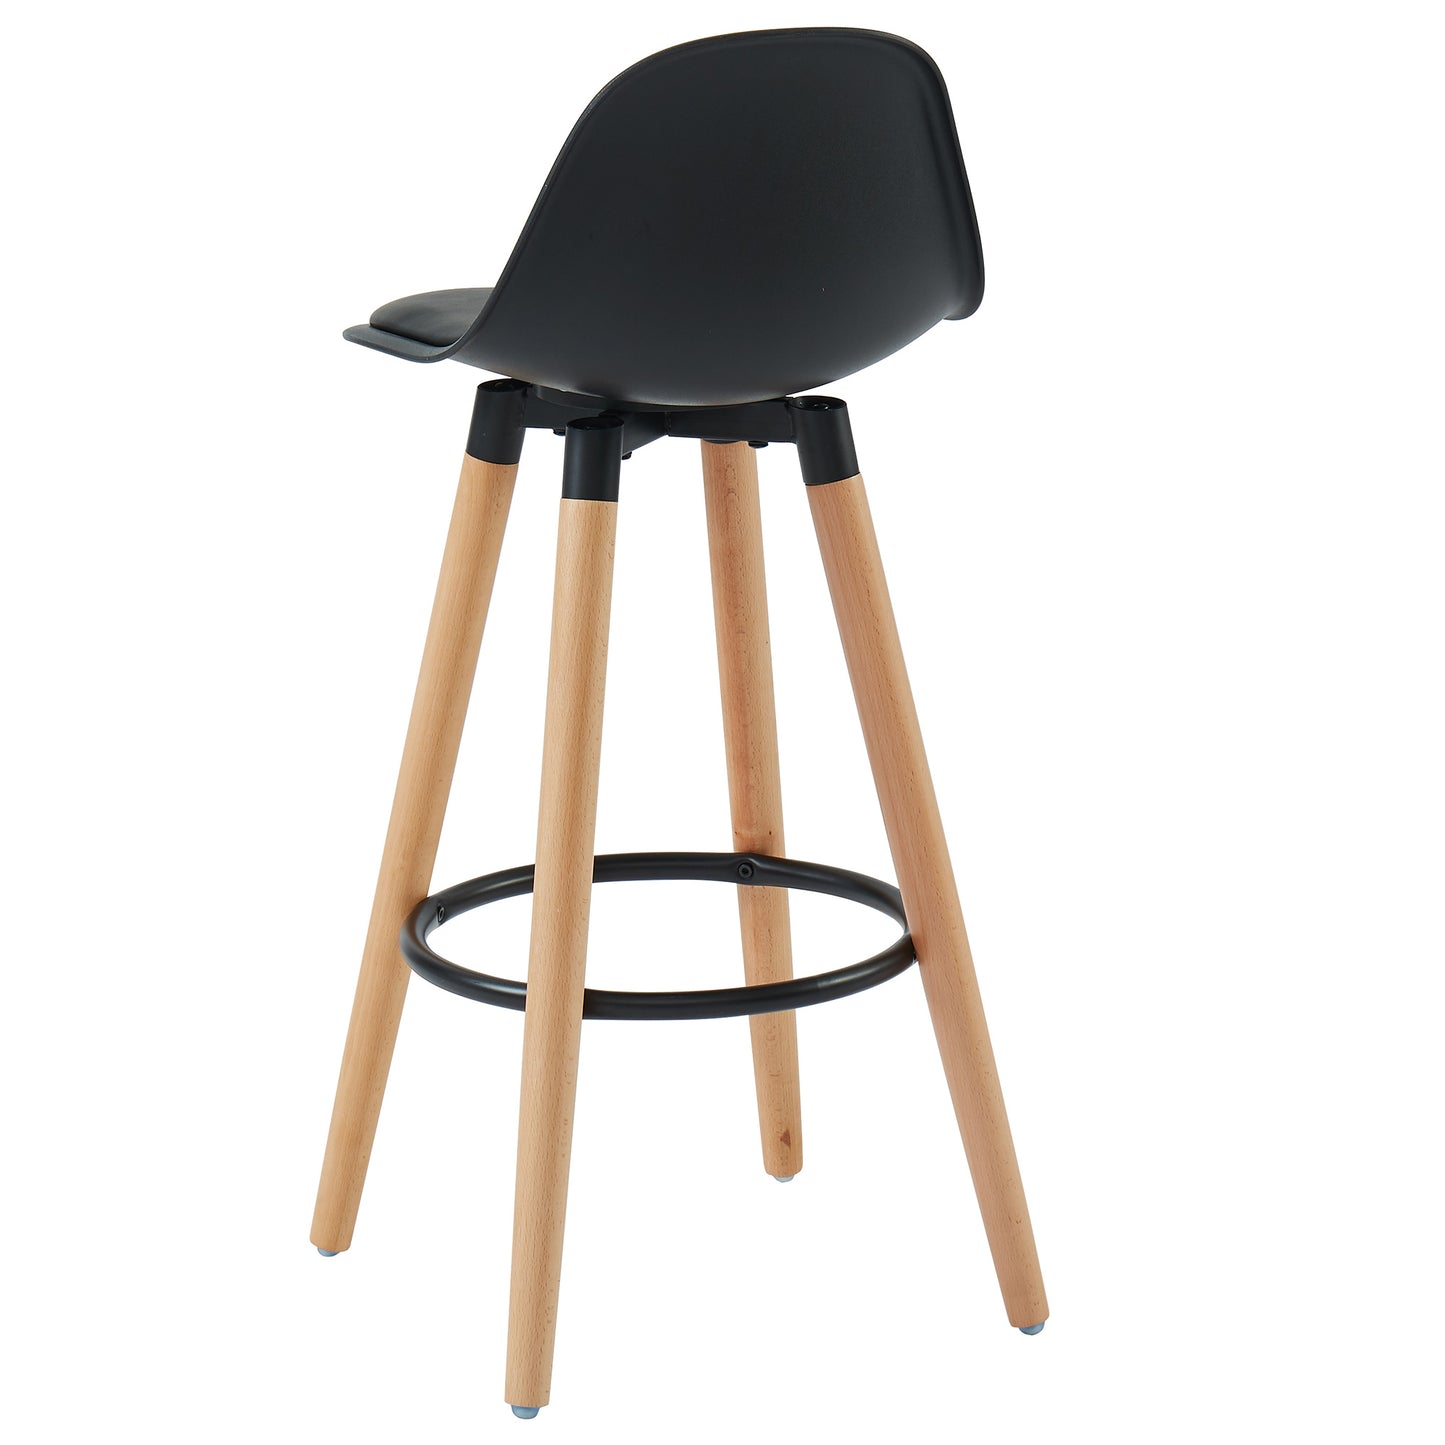 (DIABLO BLACK - 2 PACK) - LEATHER COUNTER STOOLS